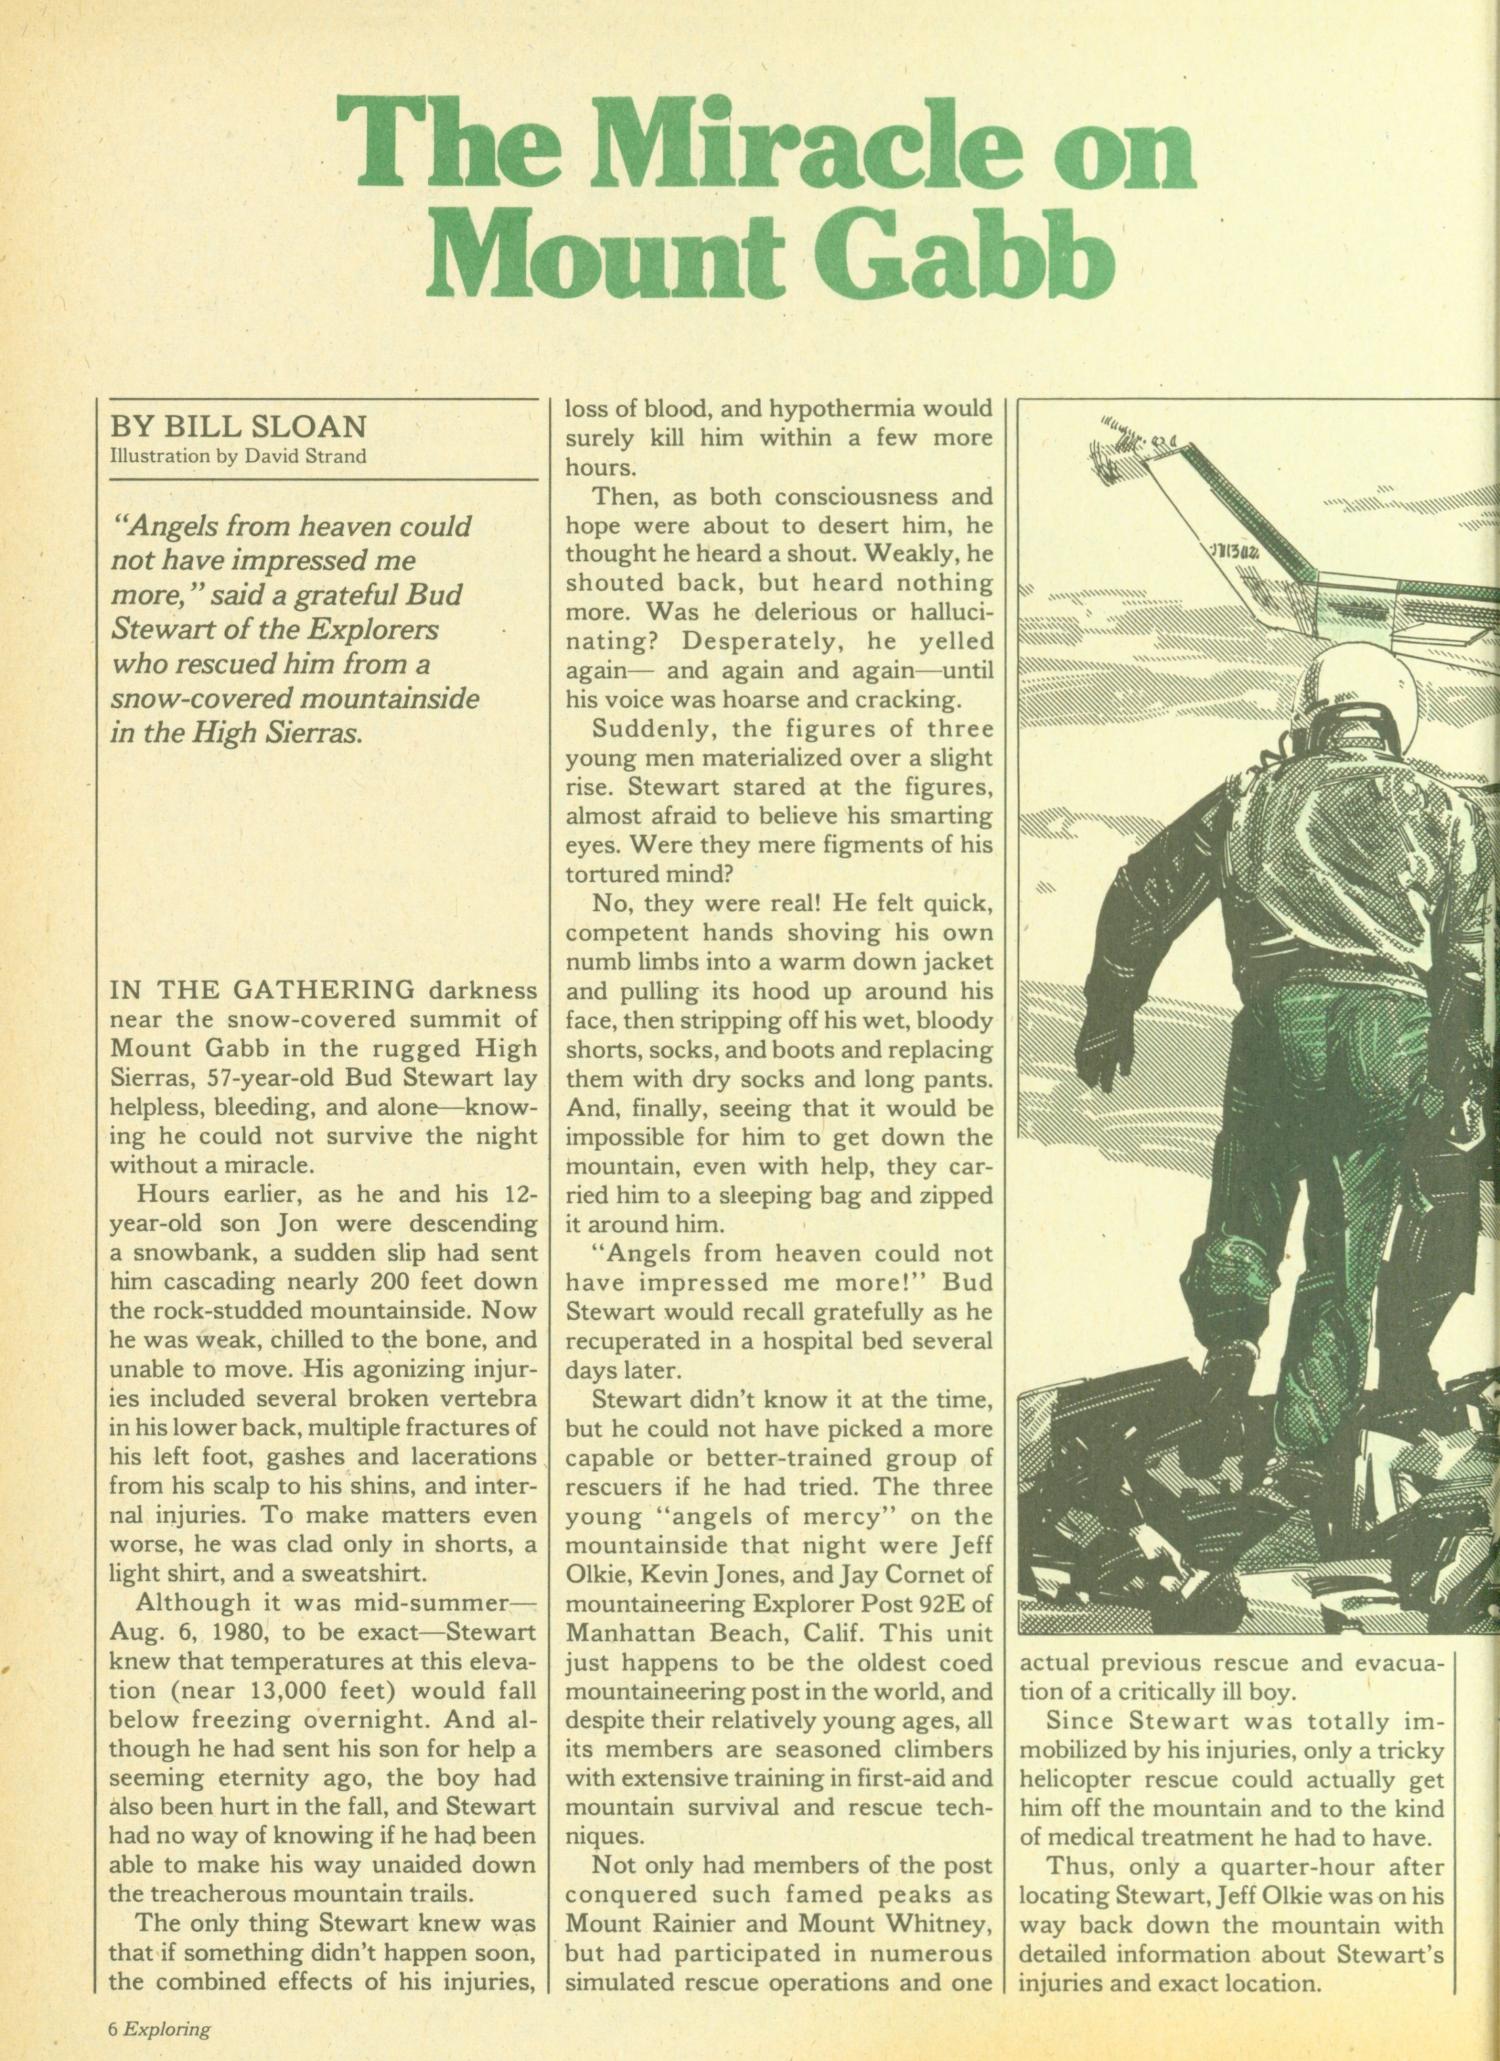 Scouting, Volume 69, Number 2, March-April 1981
                                                
                                                    6
                                                